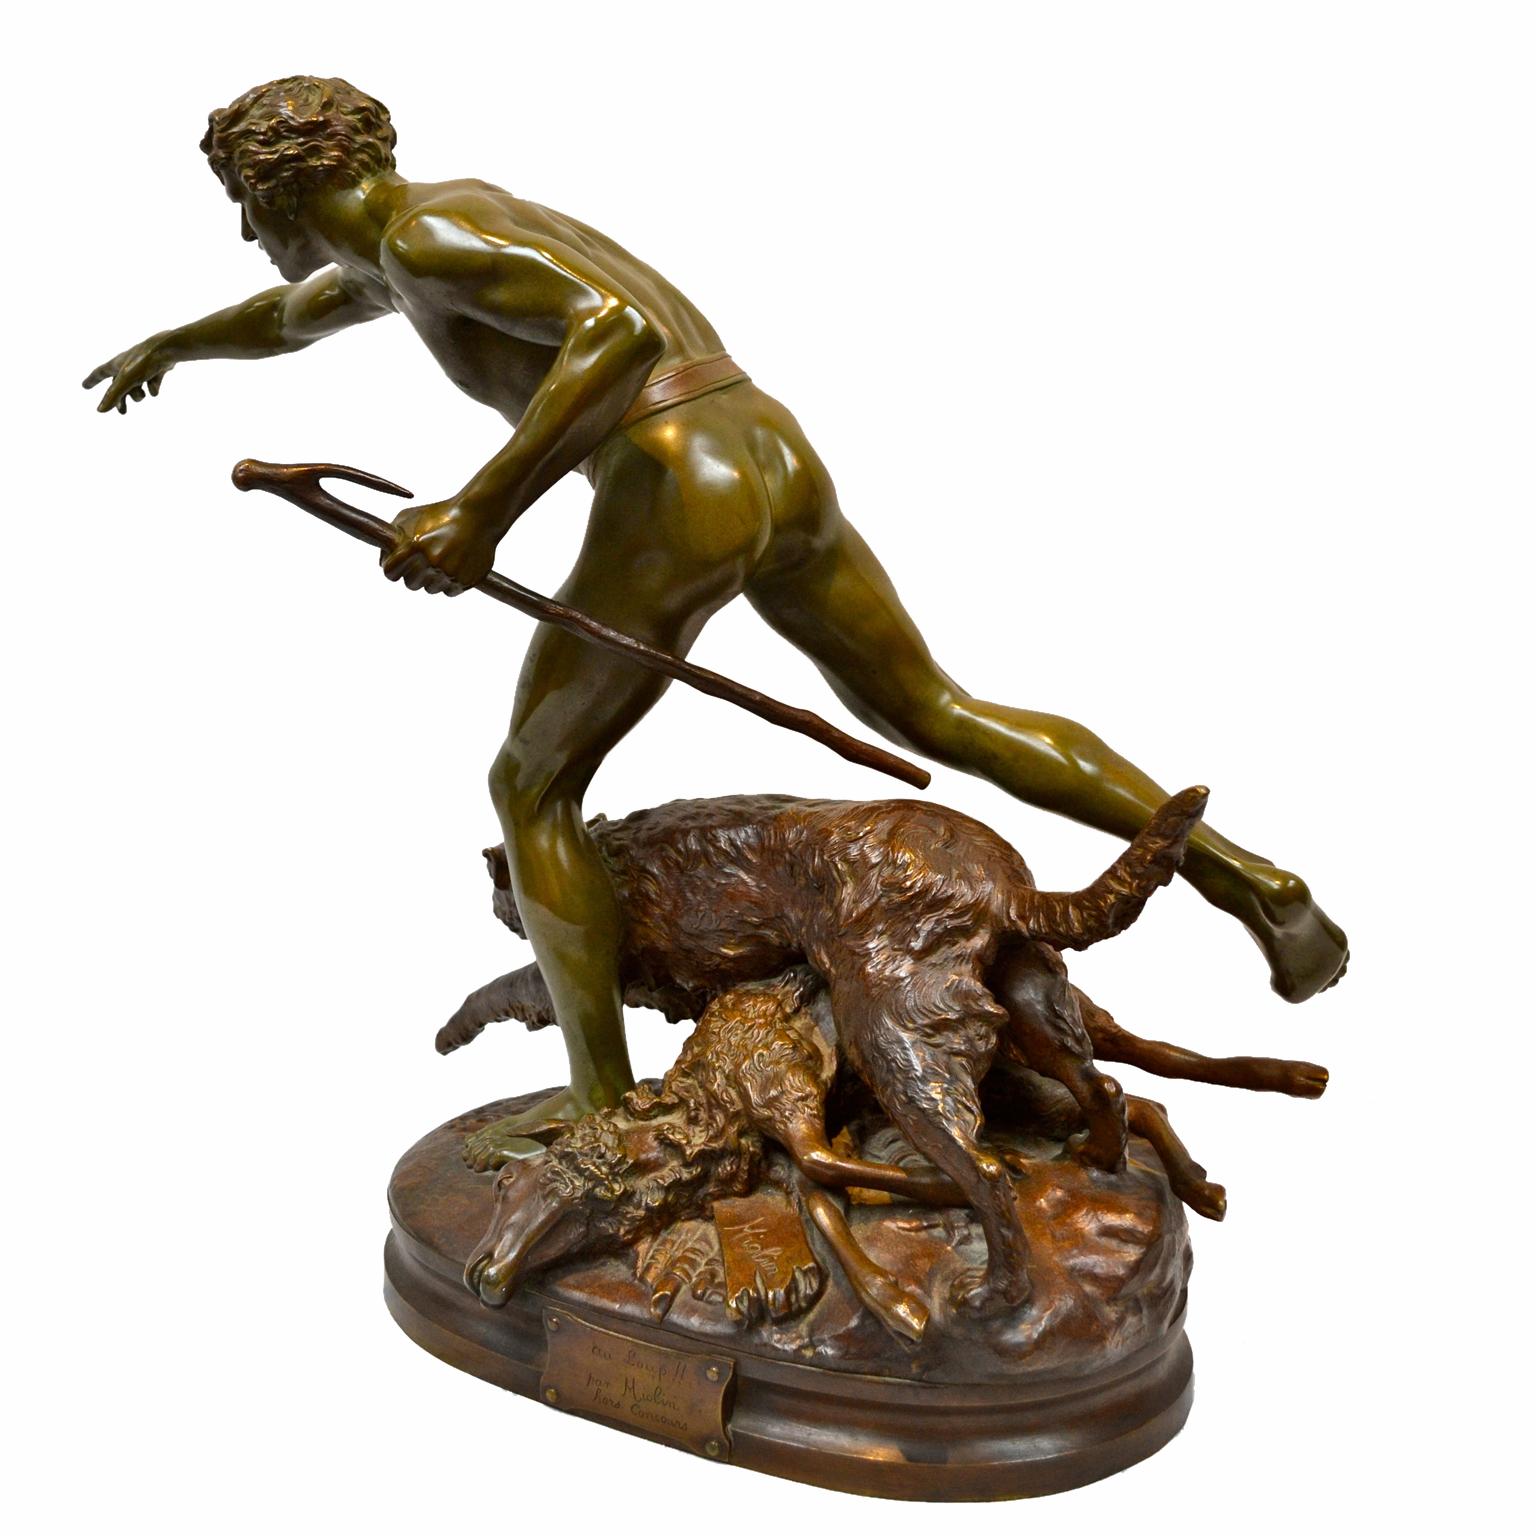 A green patinated figural bronze statue, “Au Loup” (“Chase the Wolf”), by French artist Louis Auguste Hiolin (1846-1912). The sculpture depicts a young shepherd and his dog who, after discovering their fallen lamb, are in pursuit of the unseen wolf